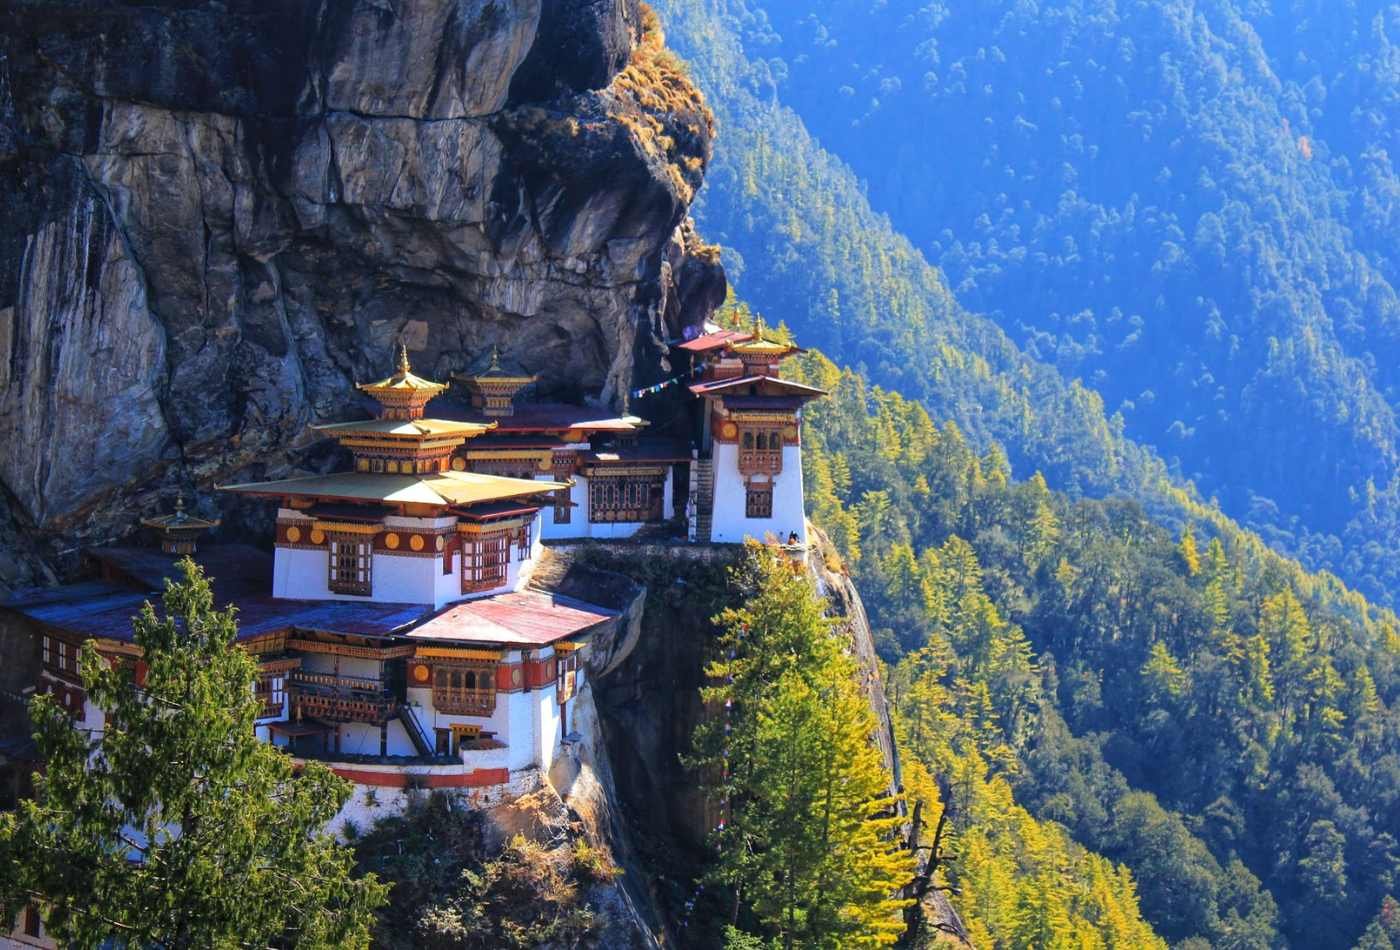 Paro Taktsang, a sacred Buddhist site also known as Tiger's Nest, perched on a cliff in the Paro Valley of Bhutan.